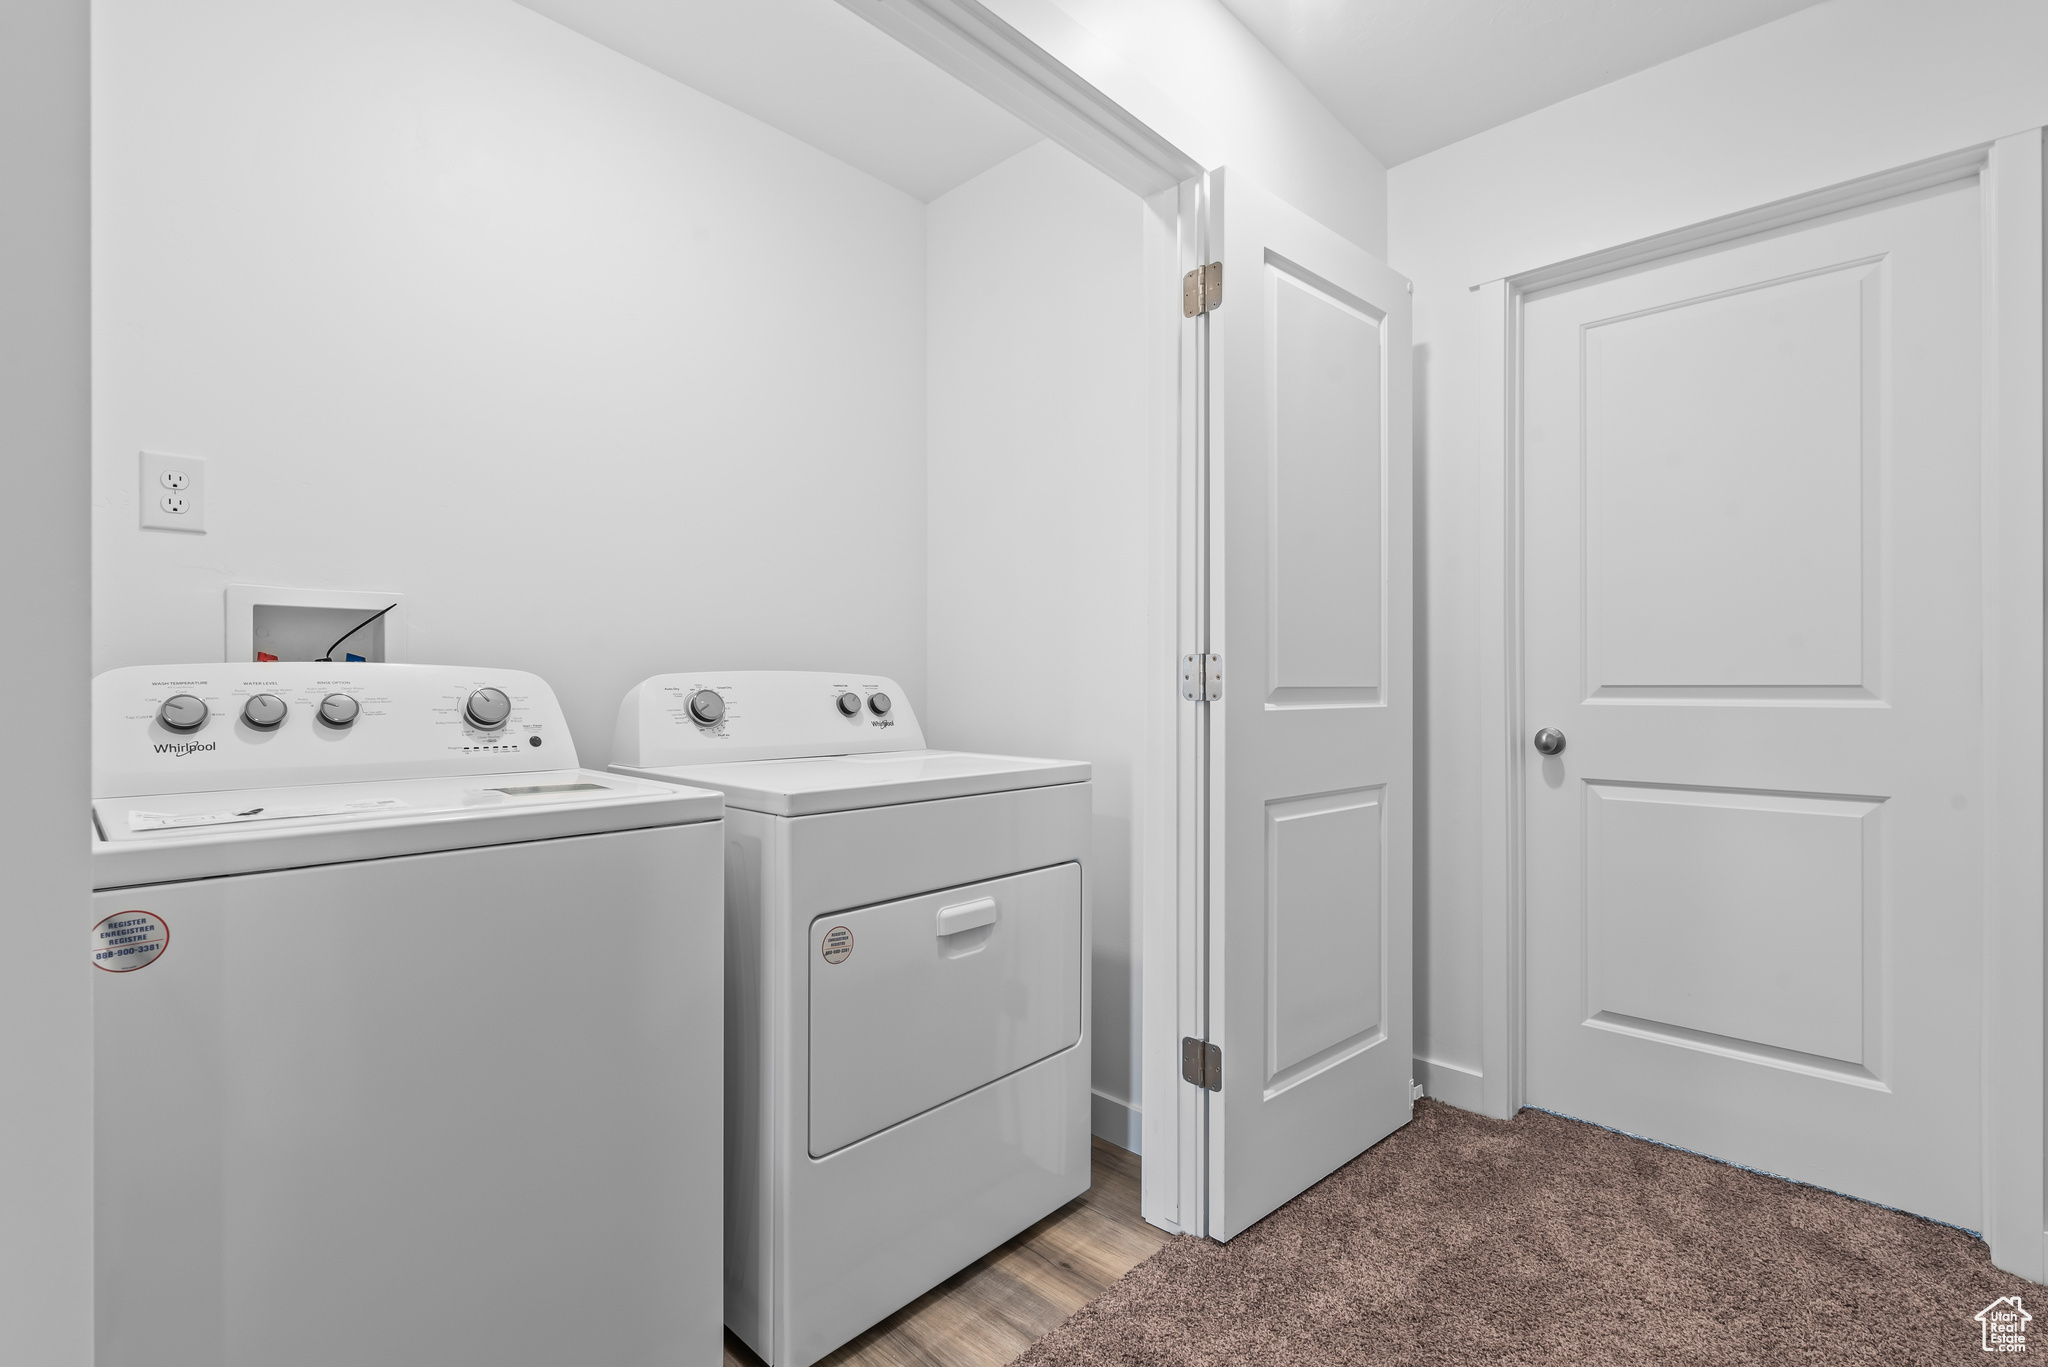 Laundry room with hookup for a washing machine, separate washer and dryer, and carpet floors